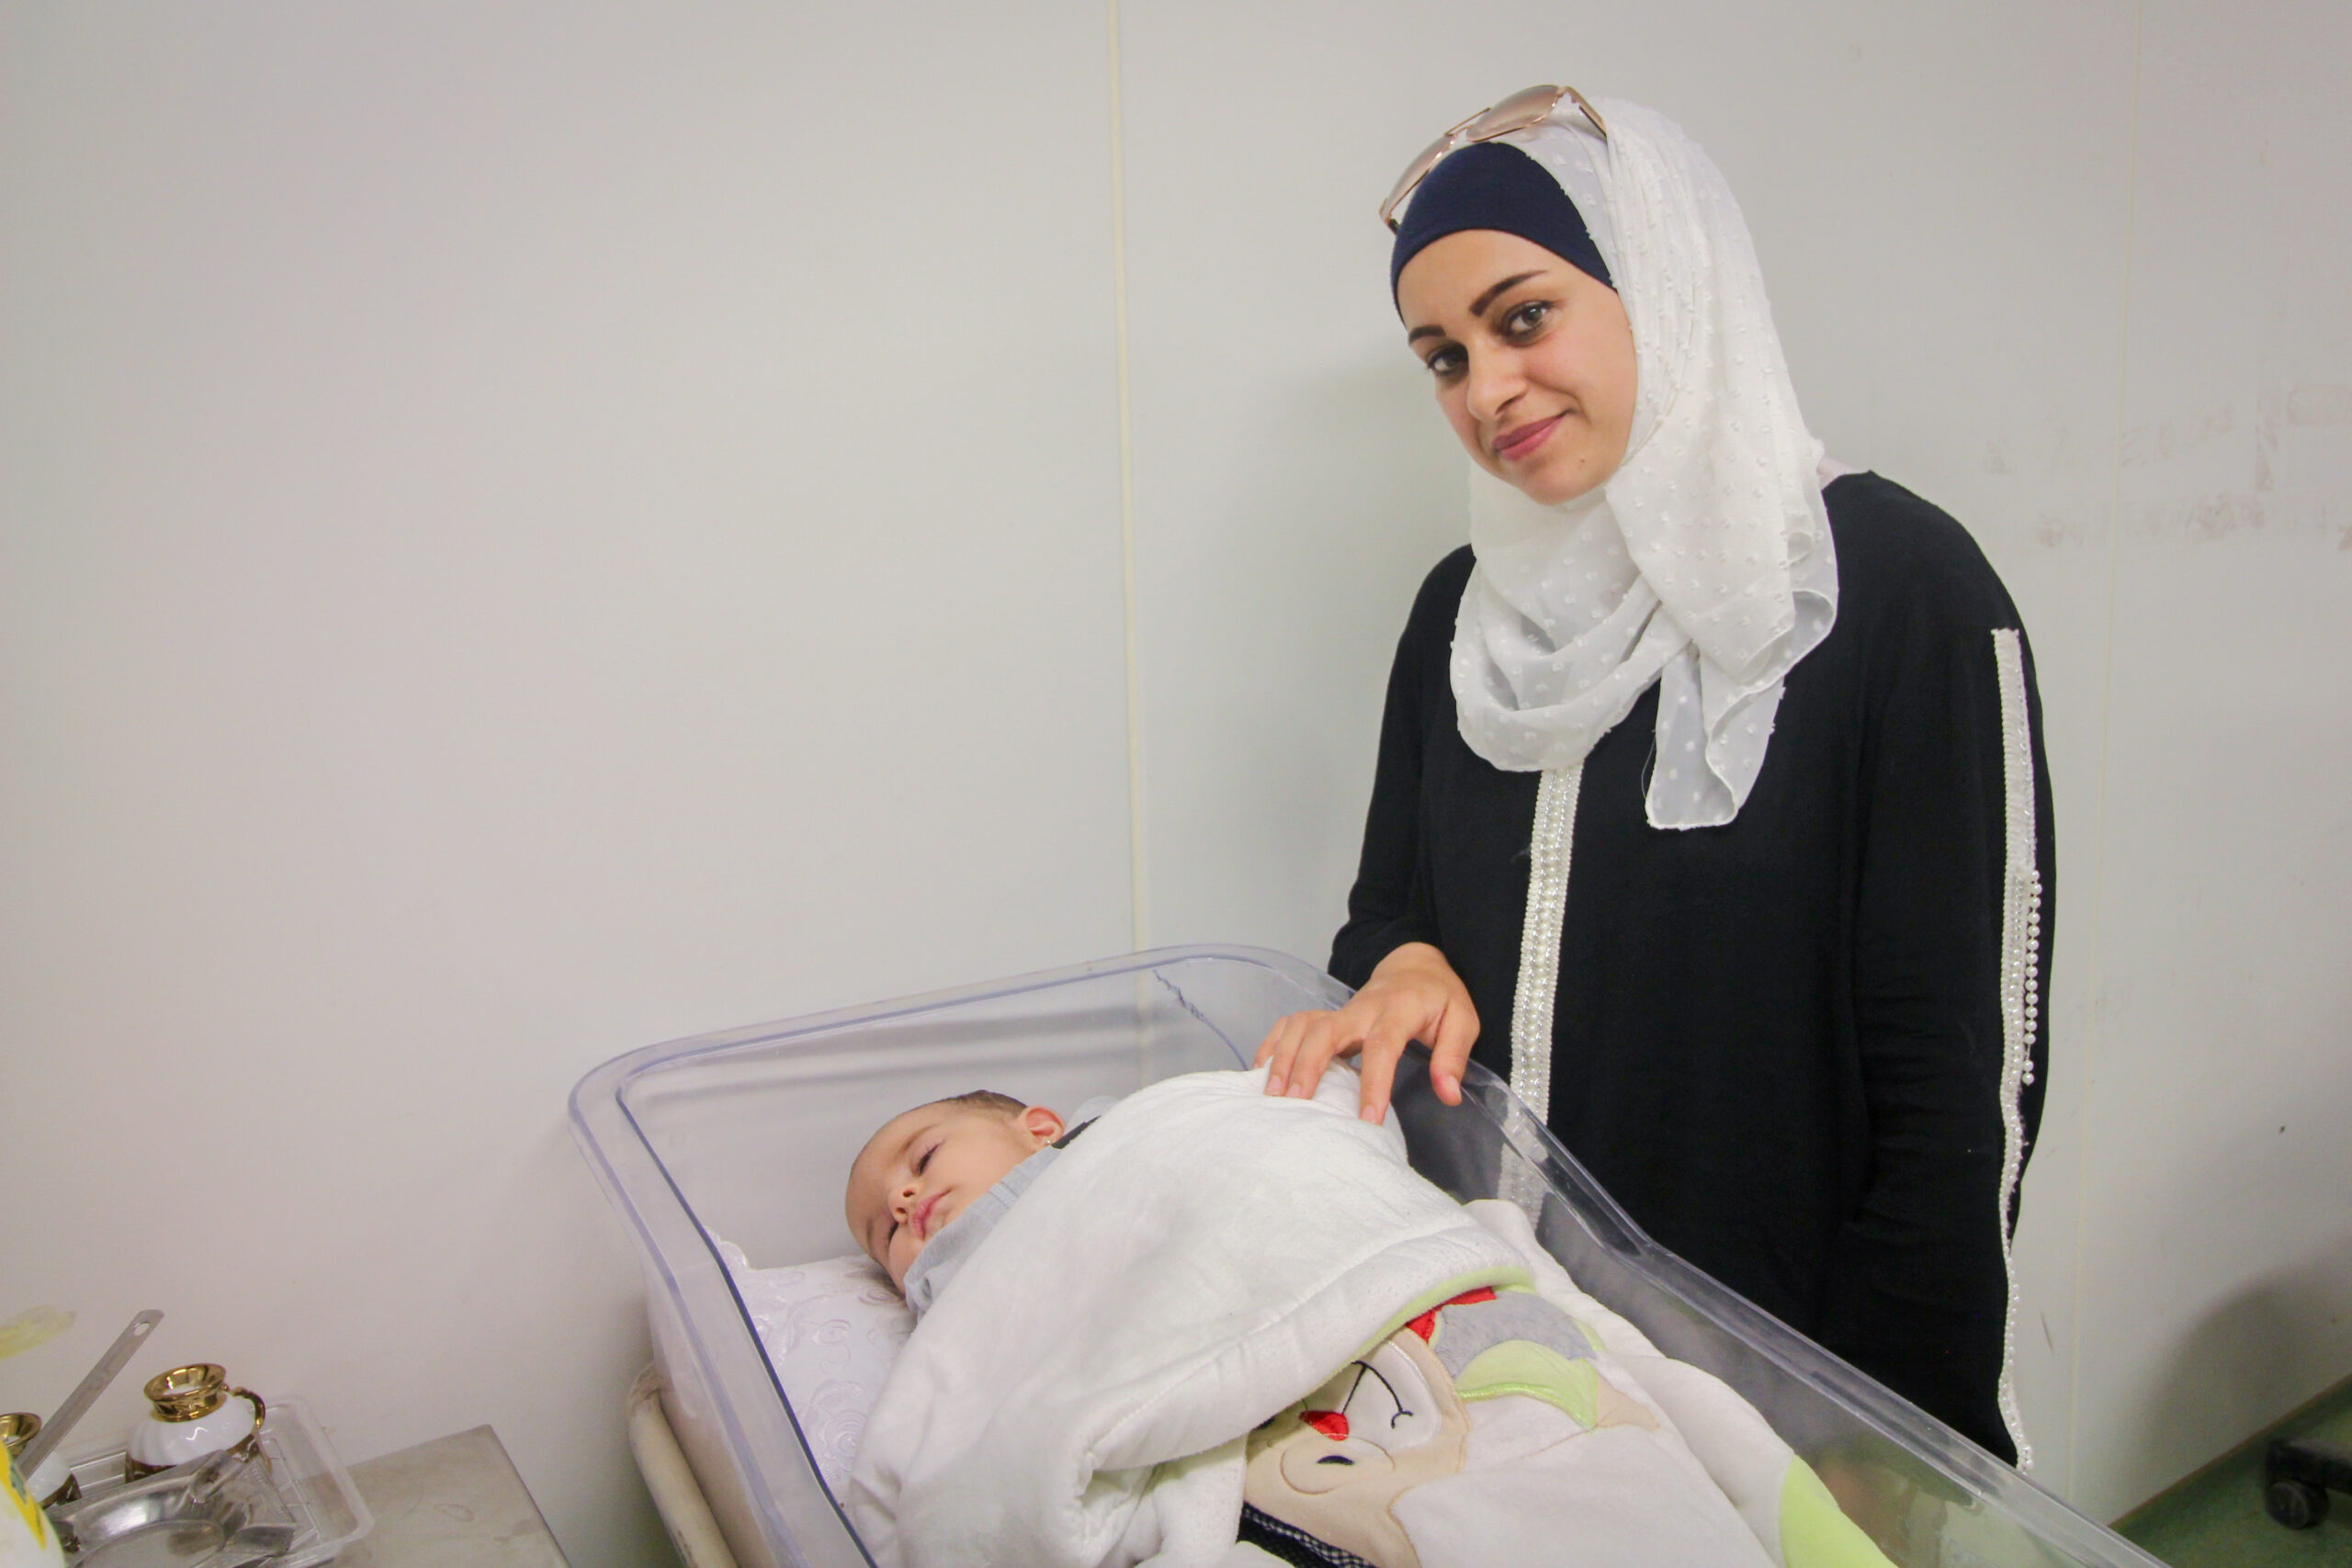 A Syrian mother standing with her baby, who is receiving care in a "hospitainer" Saving Moses provided to help combat high neonatal mortality rates in war zones.